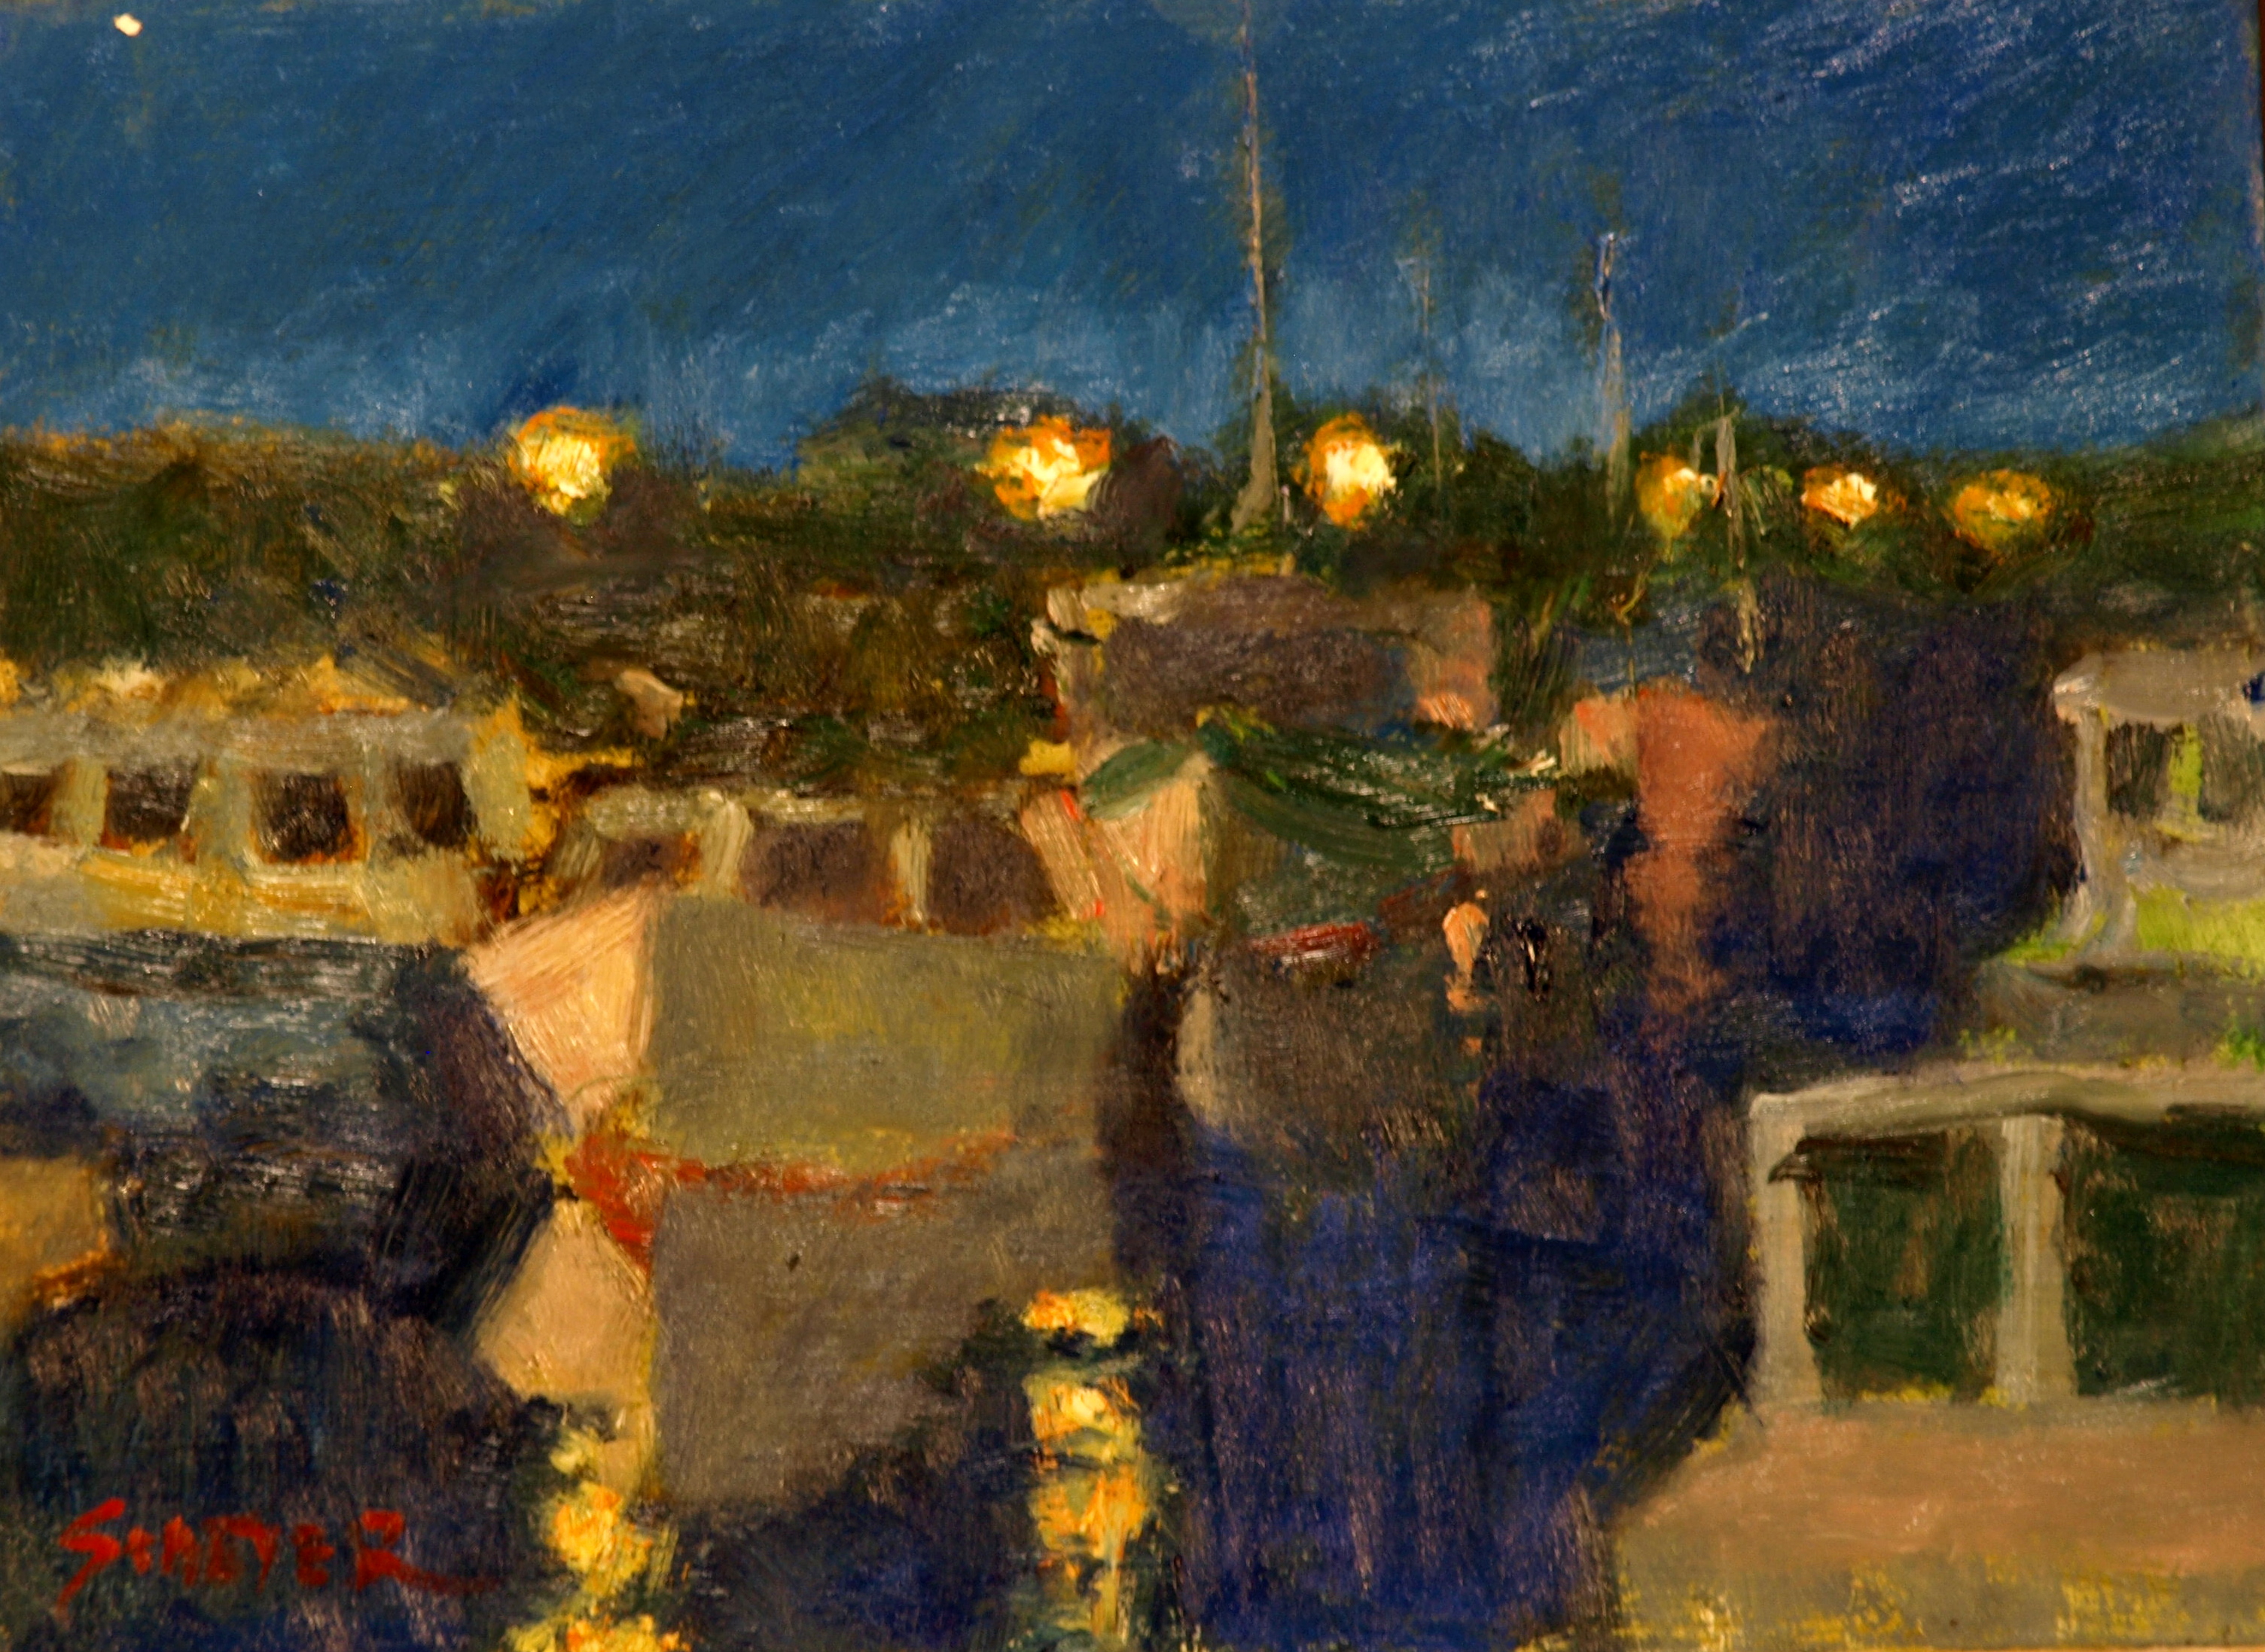 Fishing Boats - Night, Oil on Panel, 9 x 12 Inches, by Richard Stalter, $225